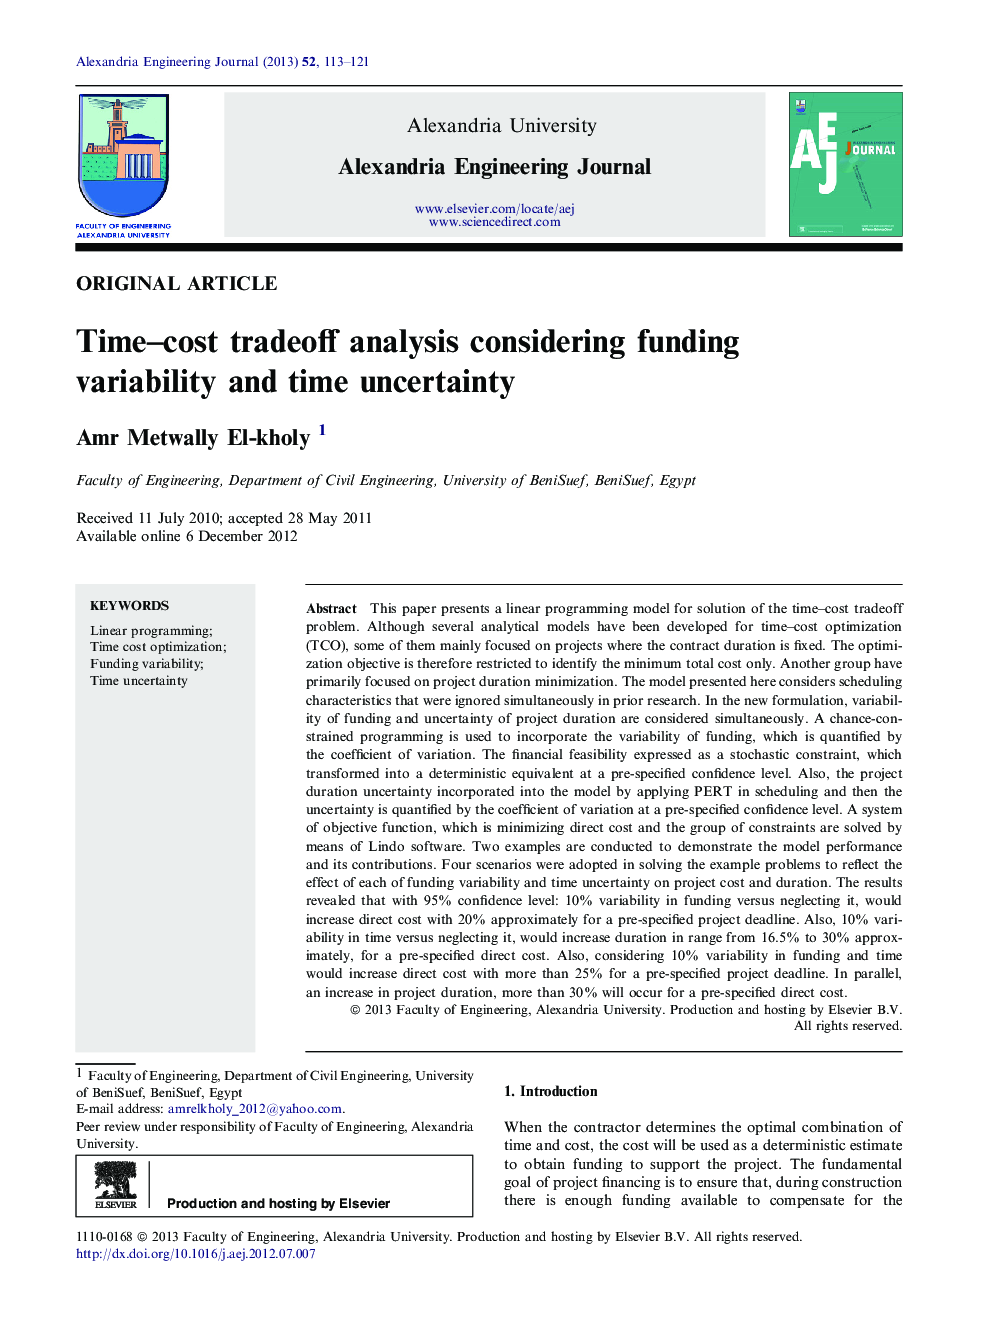 Time–cost tradeoff analysis considering funding variability and time uncertainty 